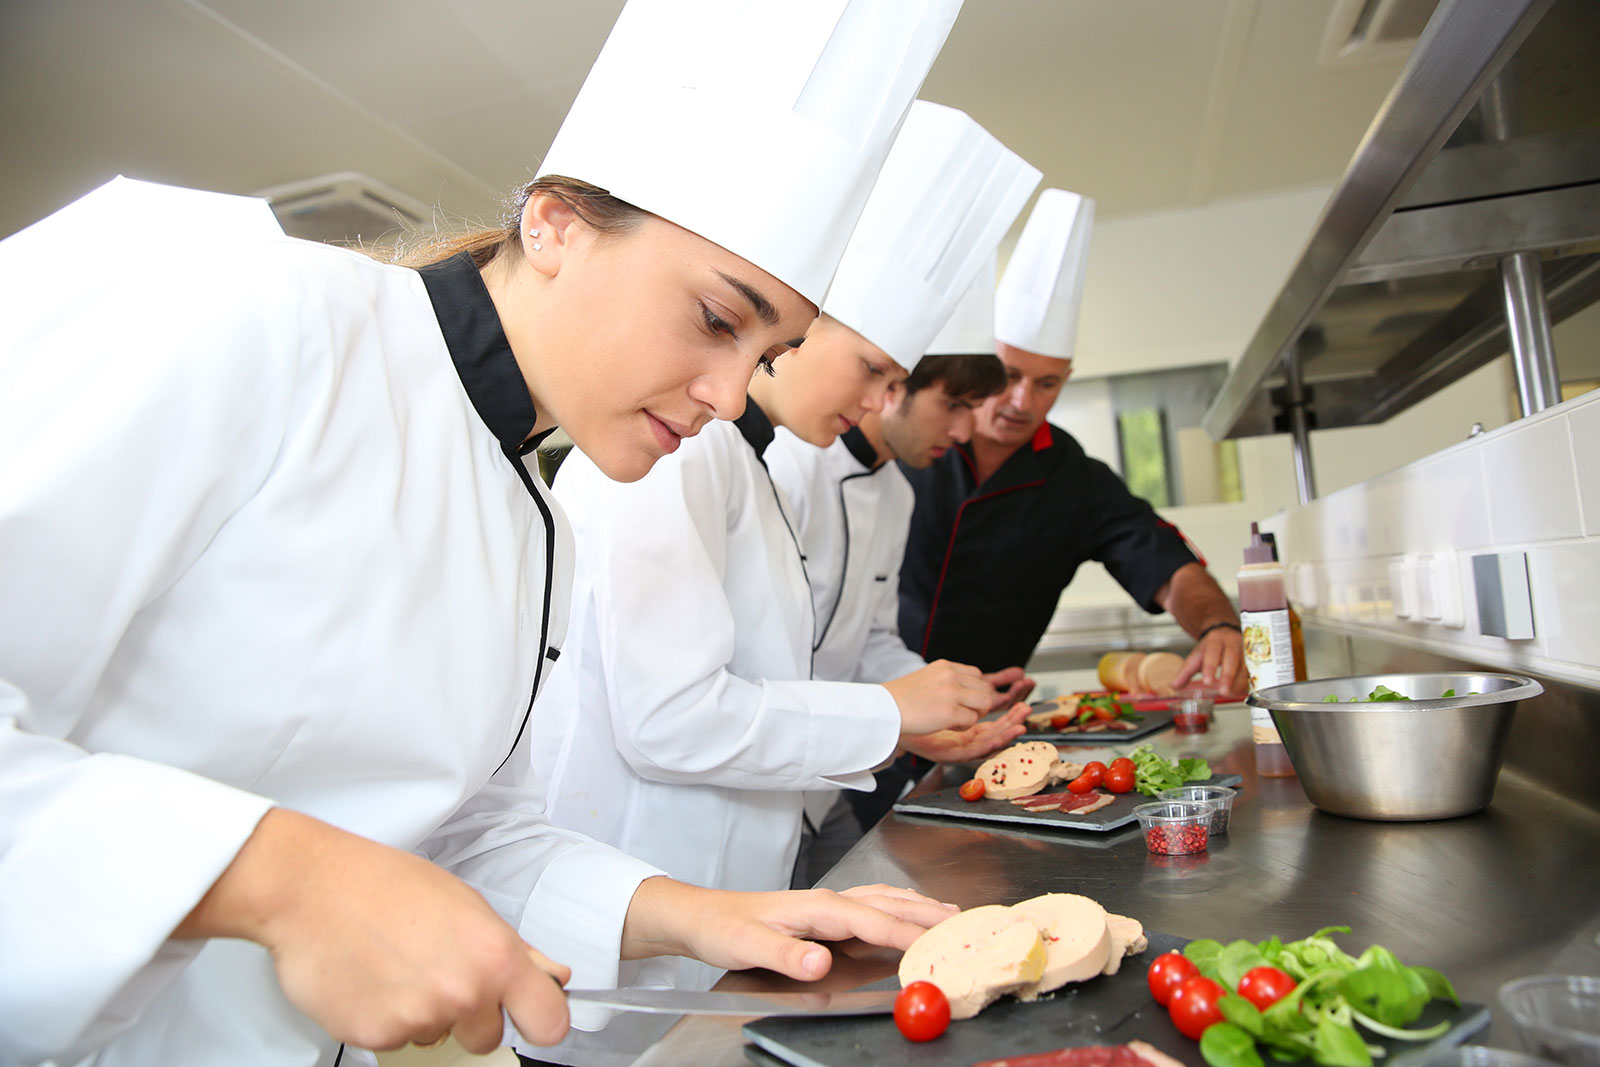 Team of chefs preparing a meal